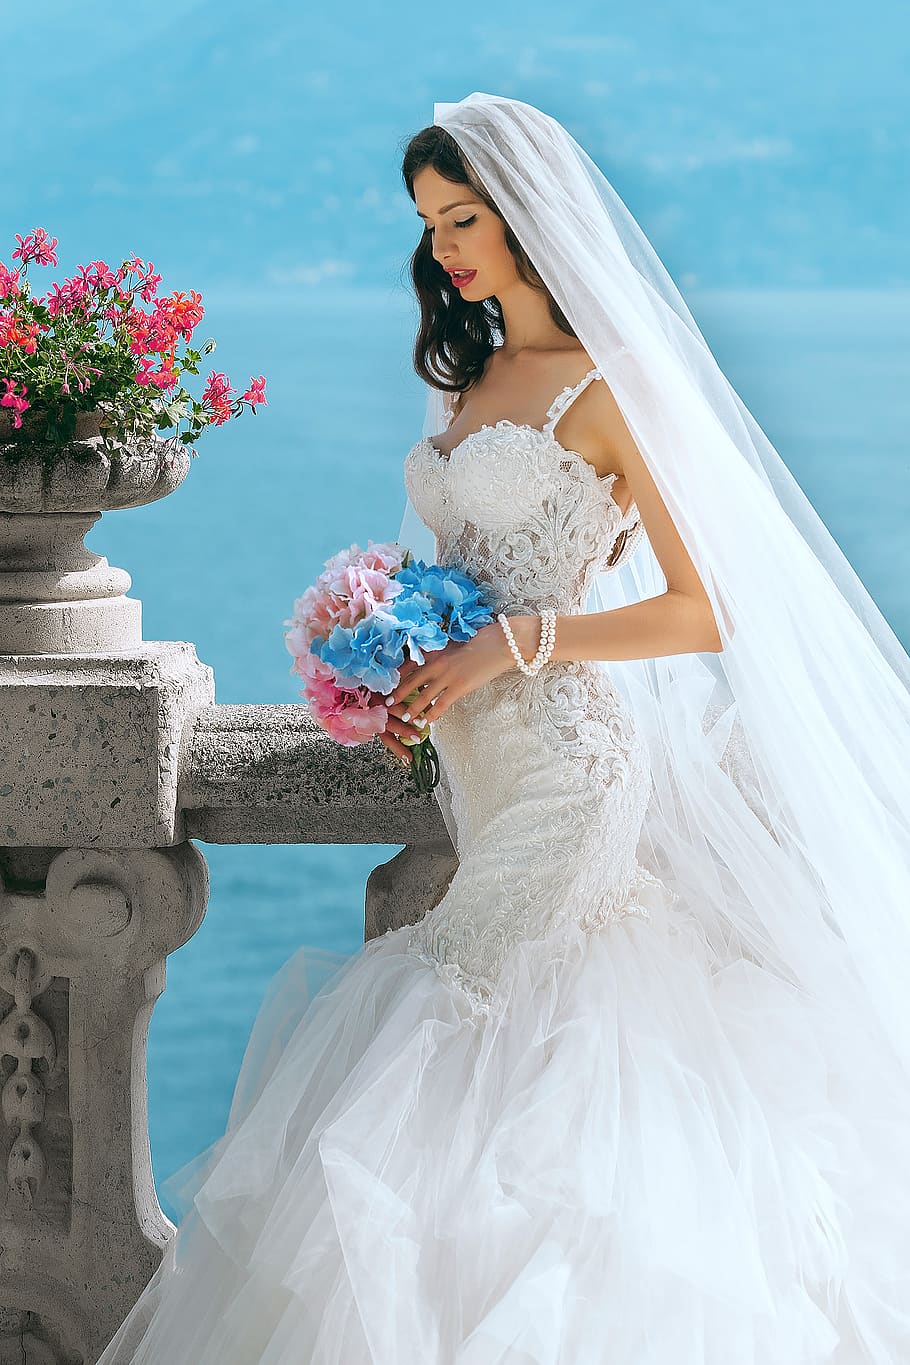 woman in wedding dress while holding flower during daytime, apparel